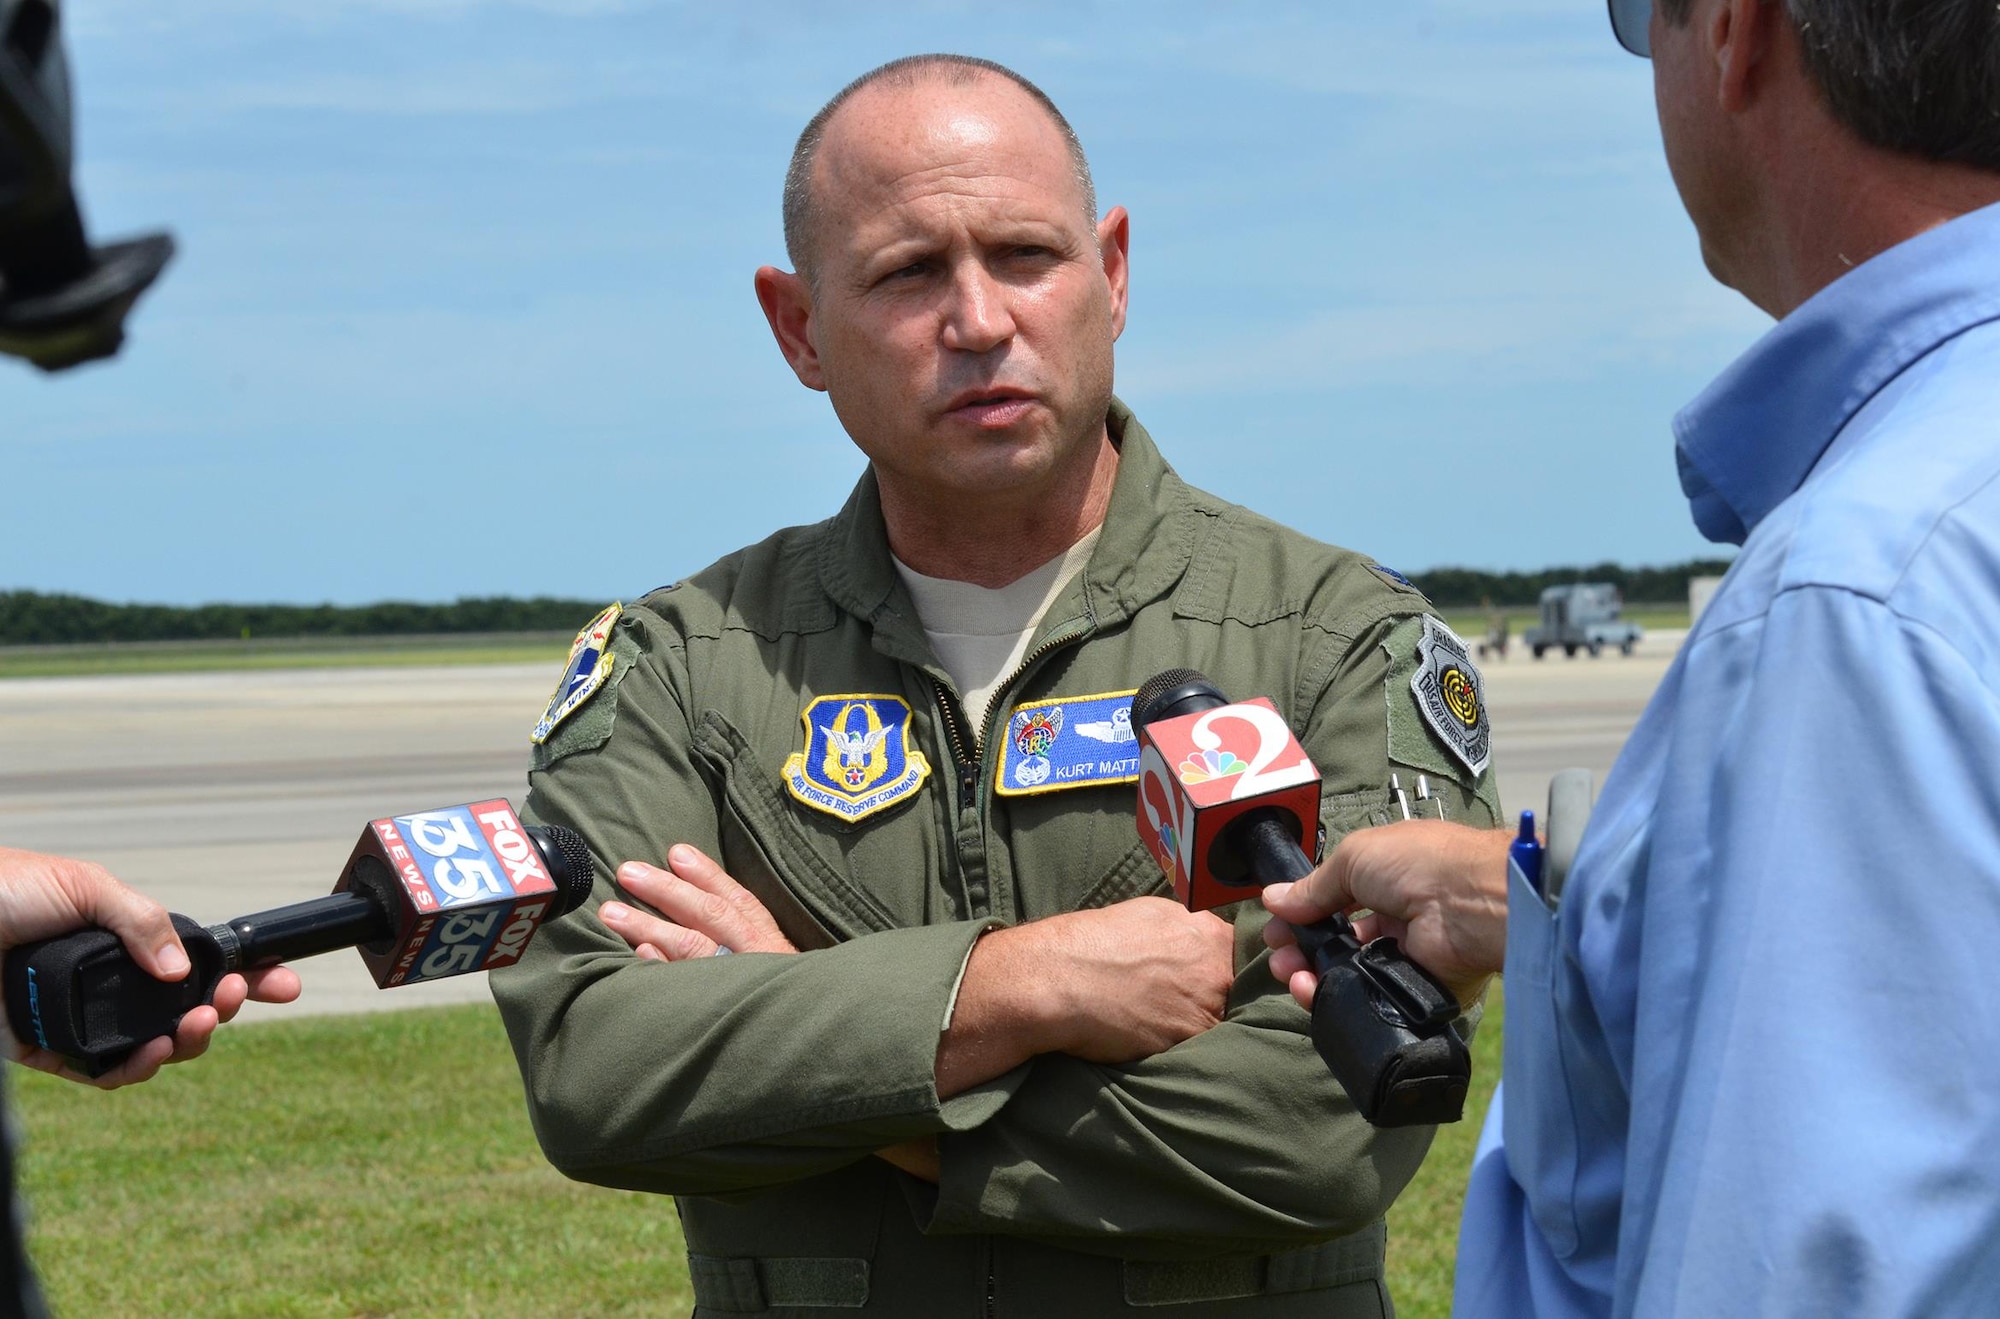 Col. Kurt Matthews, 920th Rescue Wing commander, interviews with media while a group of approximately 90 Citizen Airmen from the 920th RQW, Patrick Air Force Base, Florida, prepared take off for Texas to exercise their hurricane relief capabilities.The contingent included two HC-130P/N aerial refueling aircraft and three HH-60G Pave Hawk helicopters to Naval Air Station Ft. Worth Joint Reserve Base where Tenth Air Force Headquarters is located. If the Federal Emergency Management Agency or Air Combat Command gives the order to provide disaster relief following Hurricane Harvey’s devastating effects to the state, the 920th will be ready to help. (U.S. Air Force photo/Maj. Cathleen Snow)